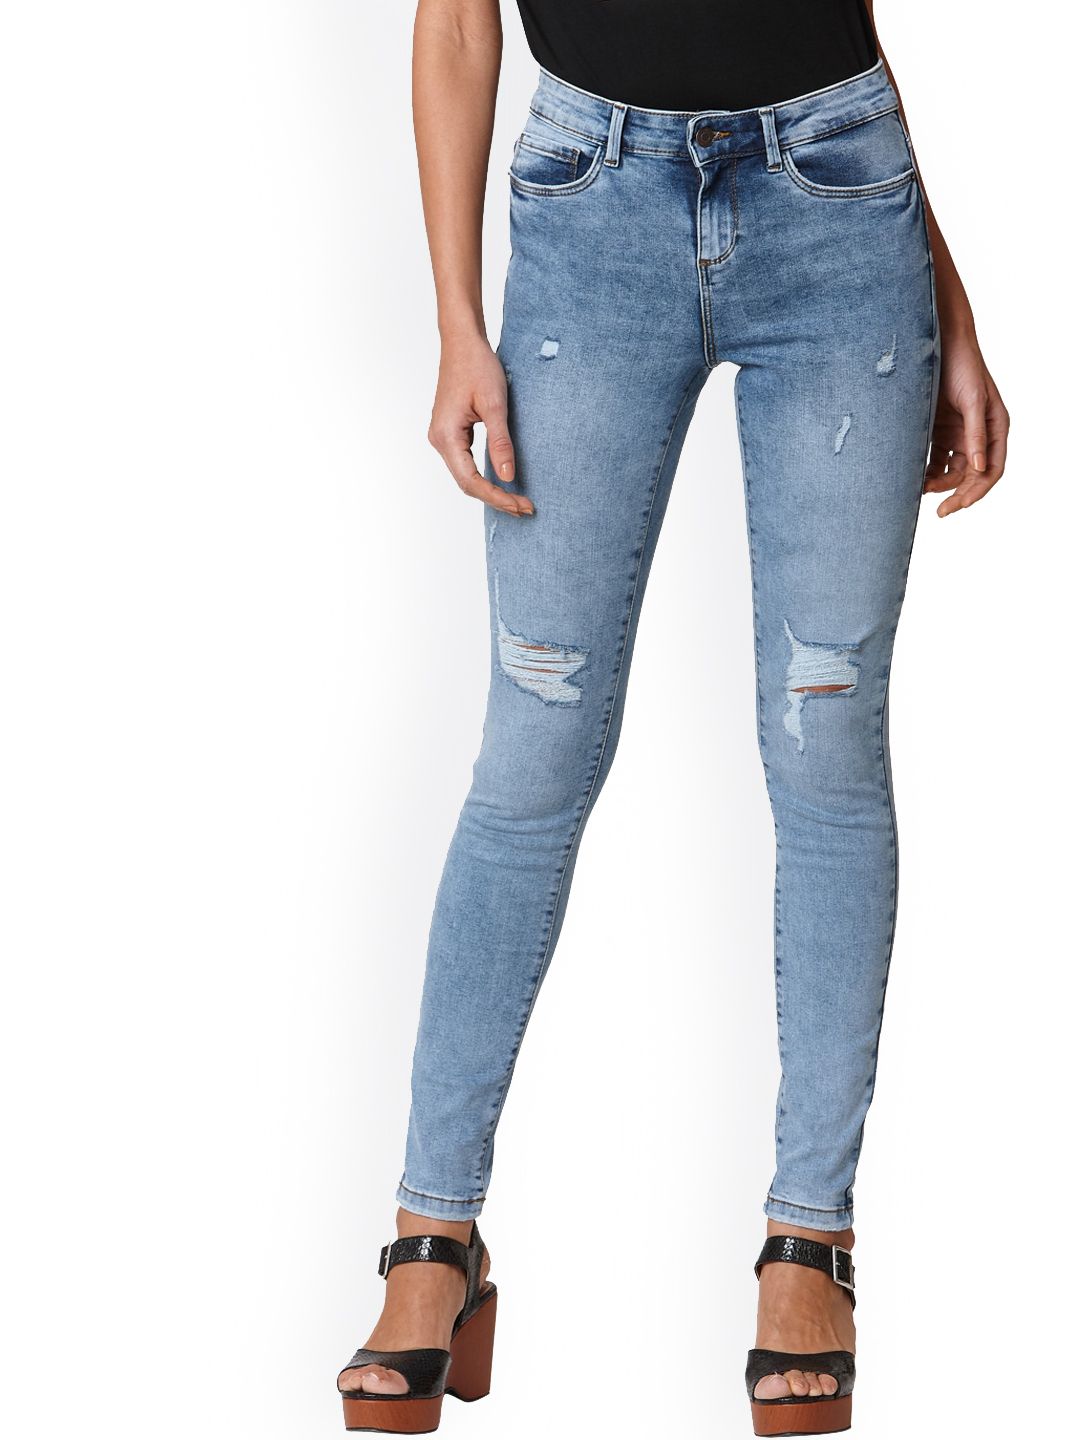 Vero Moda Women Blue Skinny Fit Mildly Distressed Heavy Fade Jeans Price in India